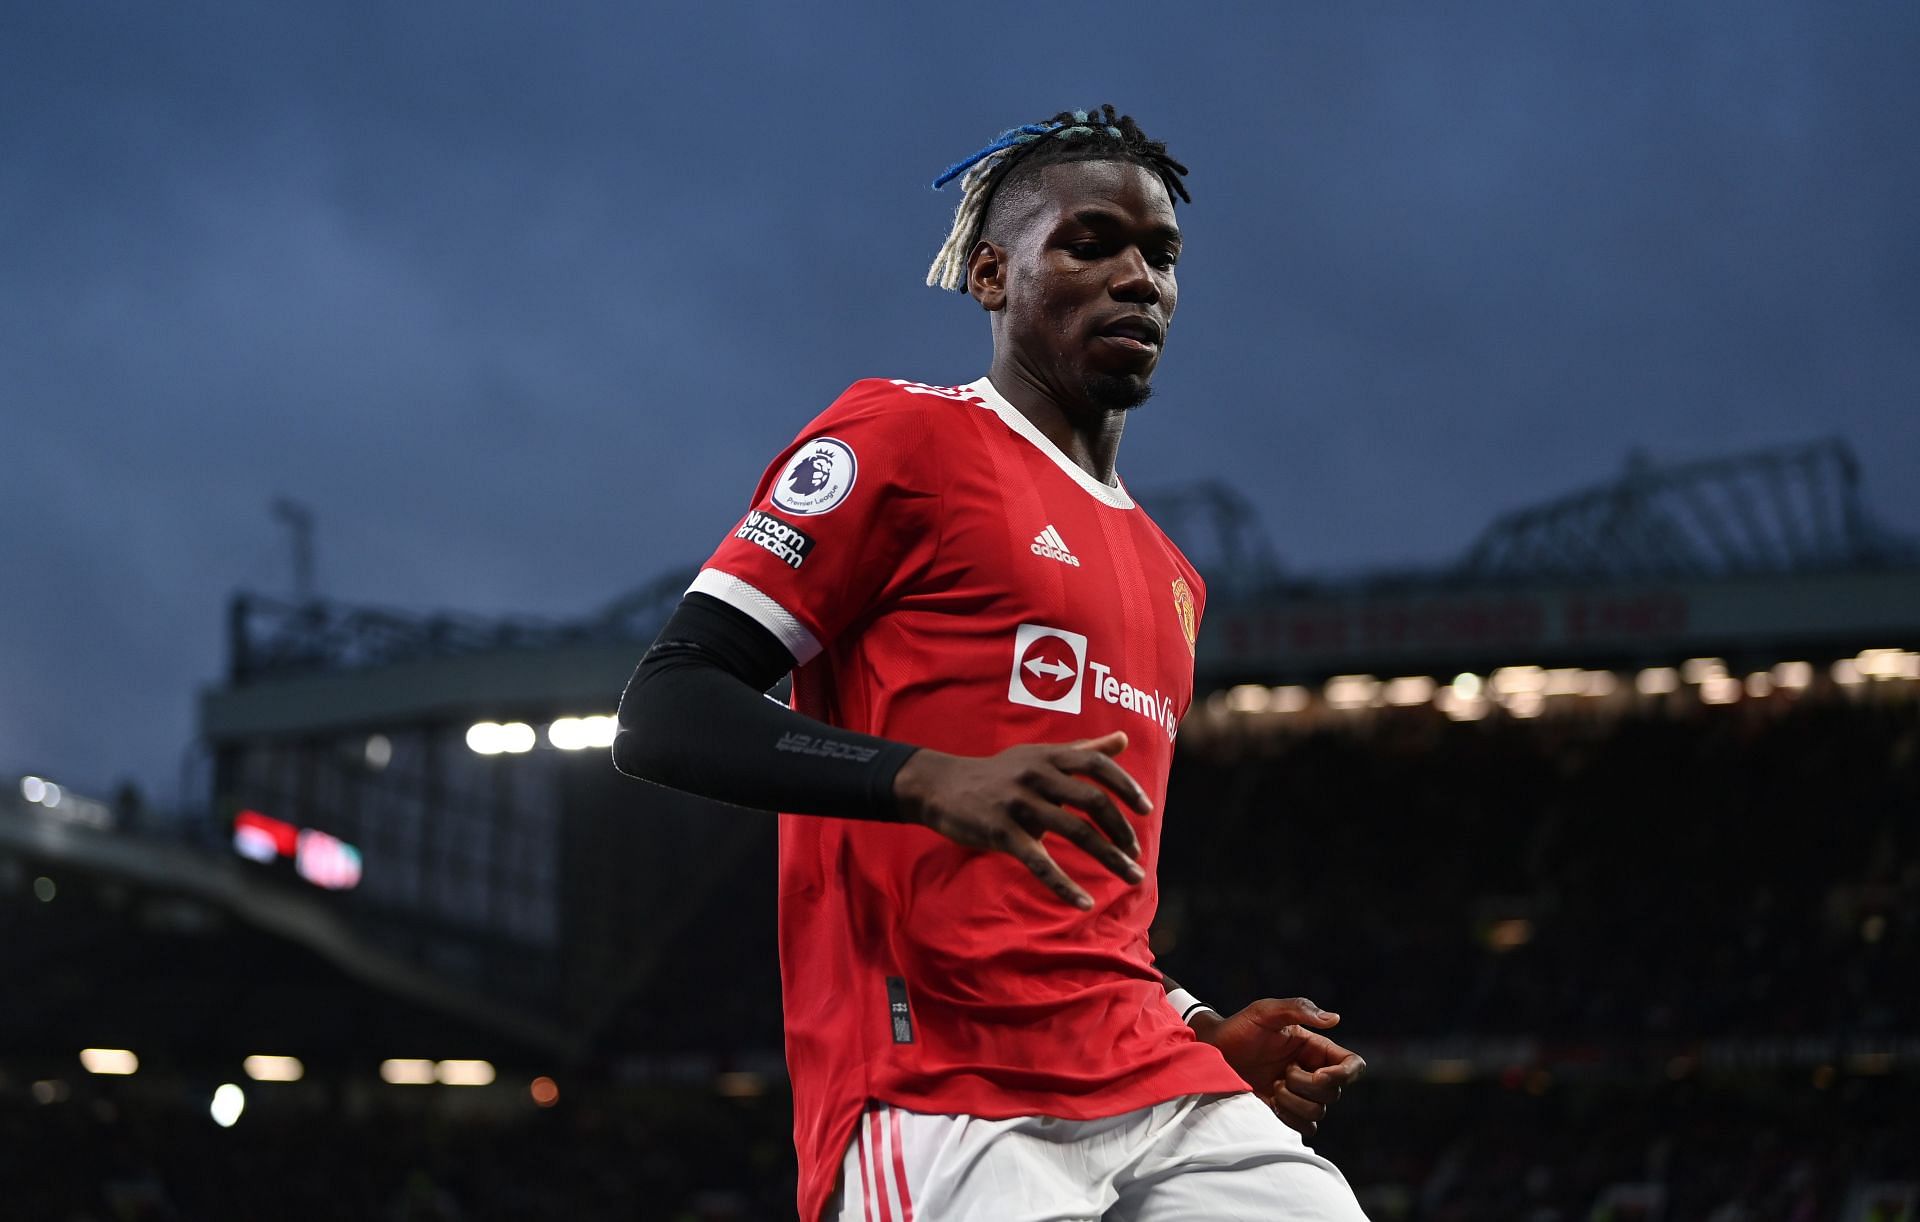 Manchester United midfielder Paul Pogba could look to join PSG, Real Madrid or Juventus next summer.